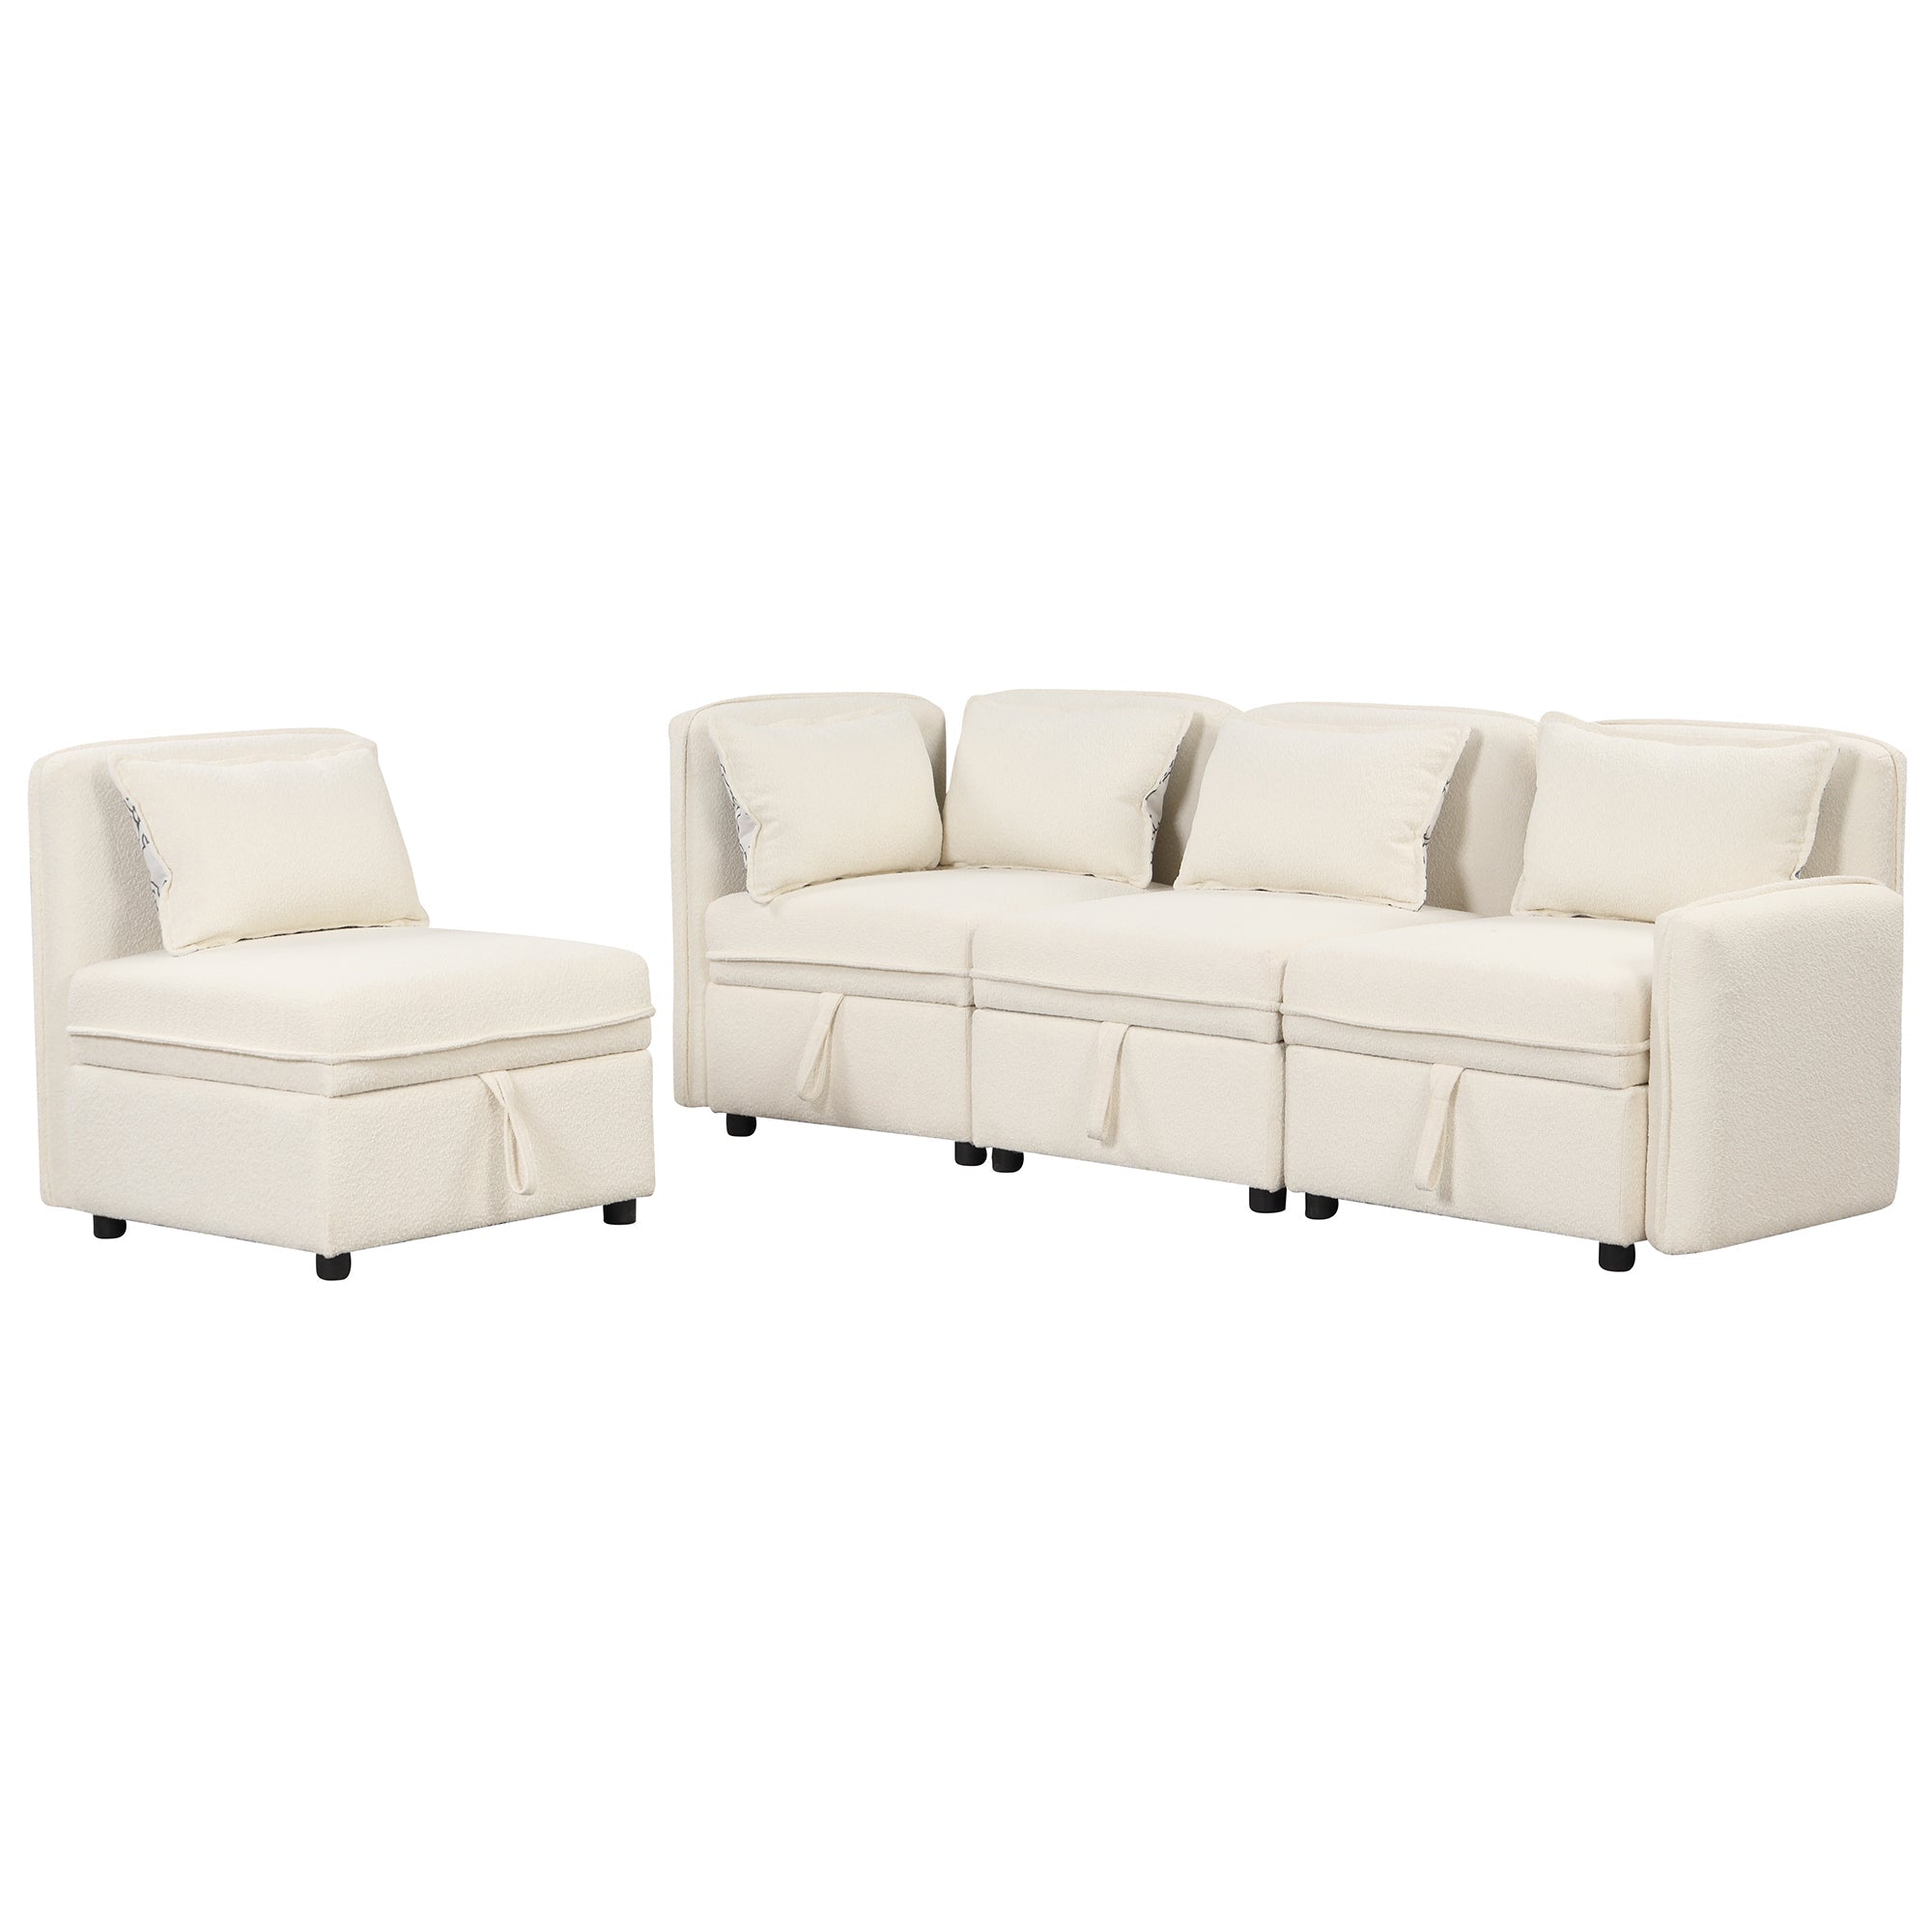 122.8" Convertible Modular Minimalist Sofa Free Combination 4 Seater Sofa Chenille Fabric Sectional sofa with 5 Pillows Cream-Stationary Sectionals-American Furniture Outlet